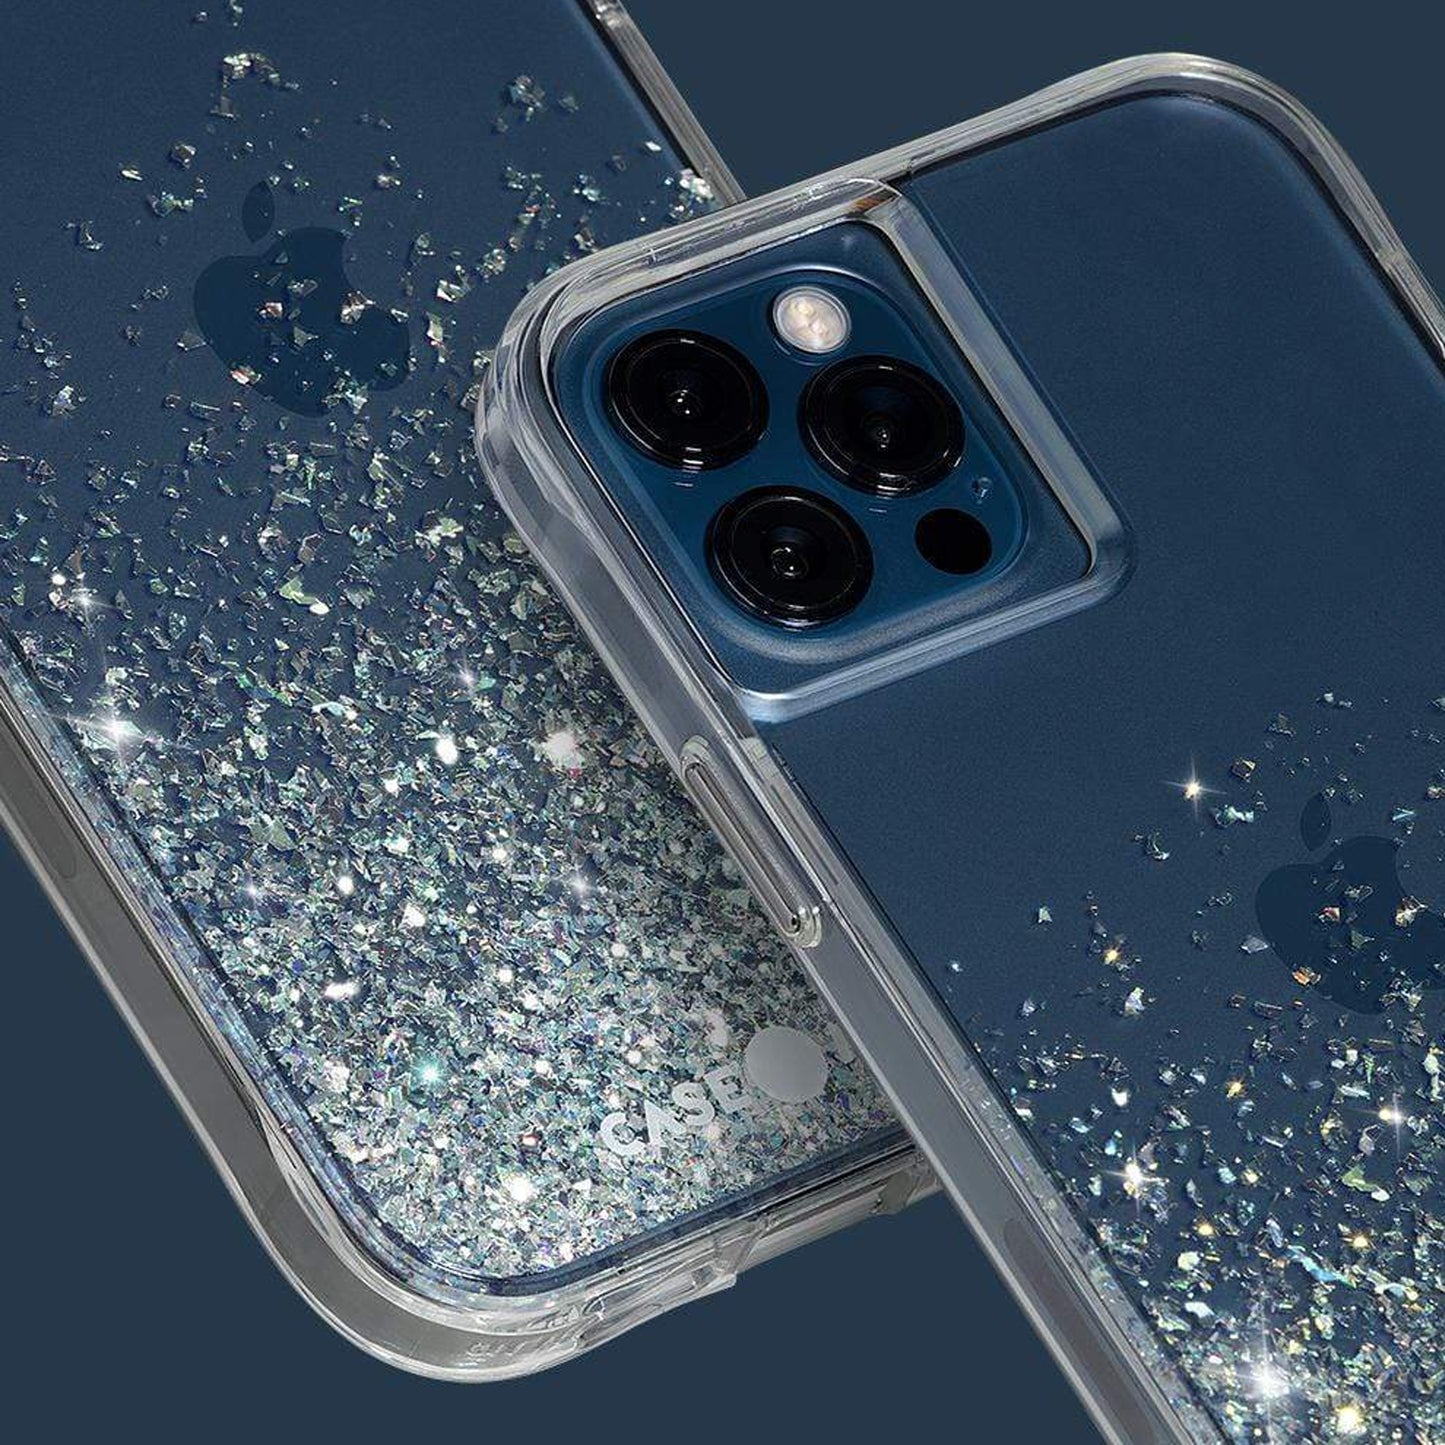 Case-Mate Twinkle Ombre for iPhone 13 Pro Max 6.7" 5G with Antimicrobial - Stardust (Barcode: 840171706215)